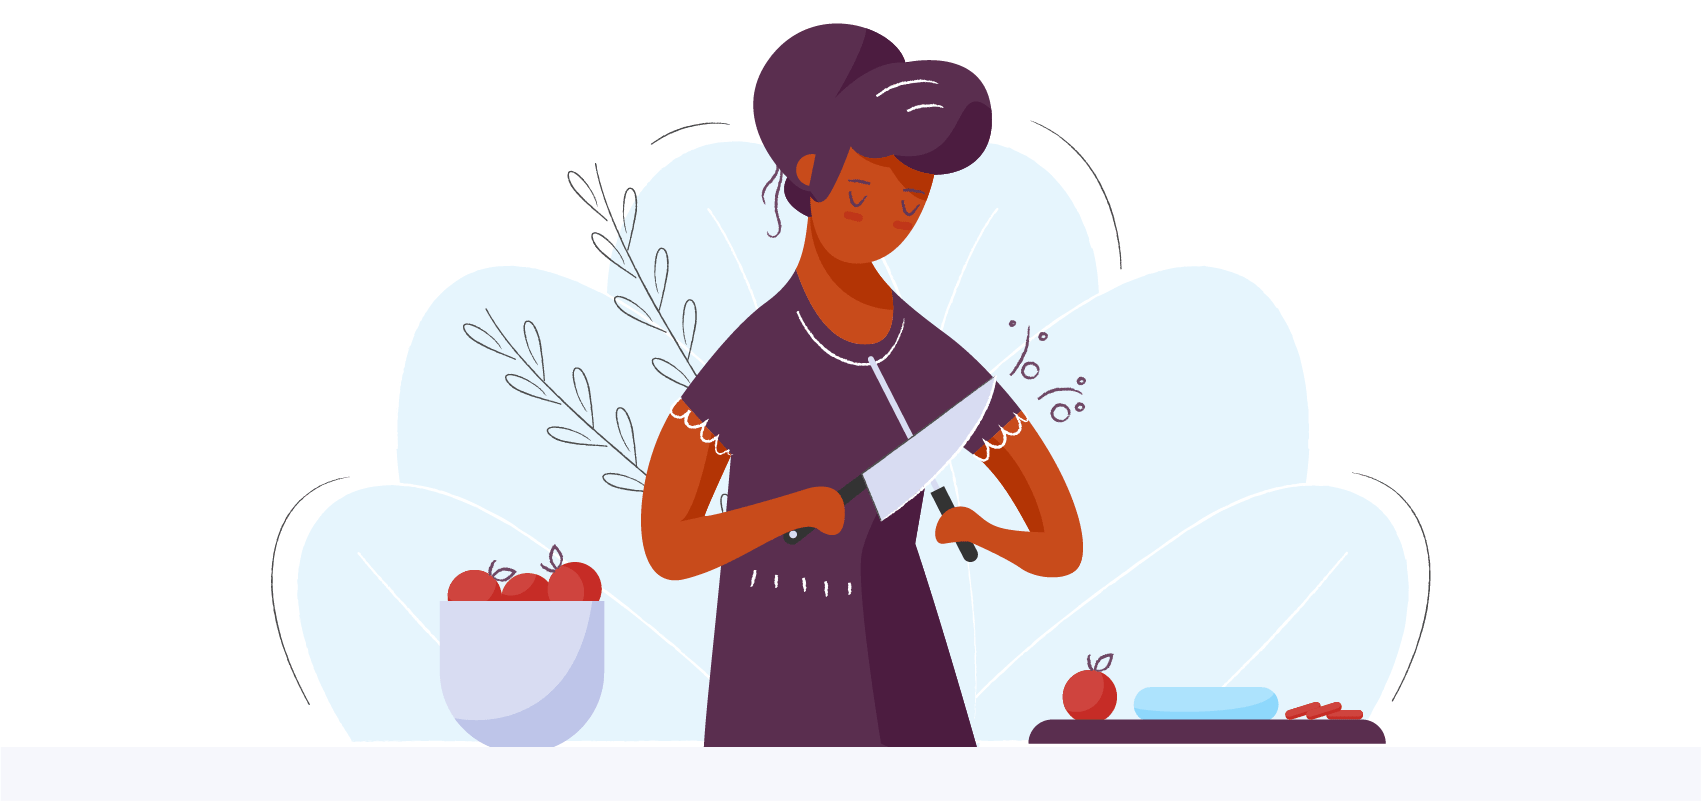 Person sharpening a knife before cutting tomatoes. Illustration.